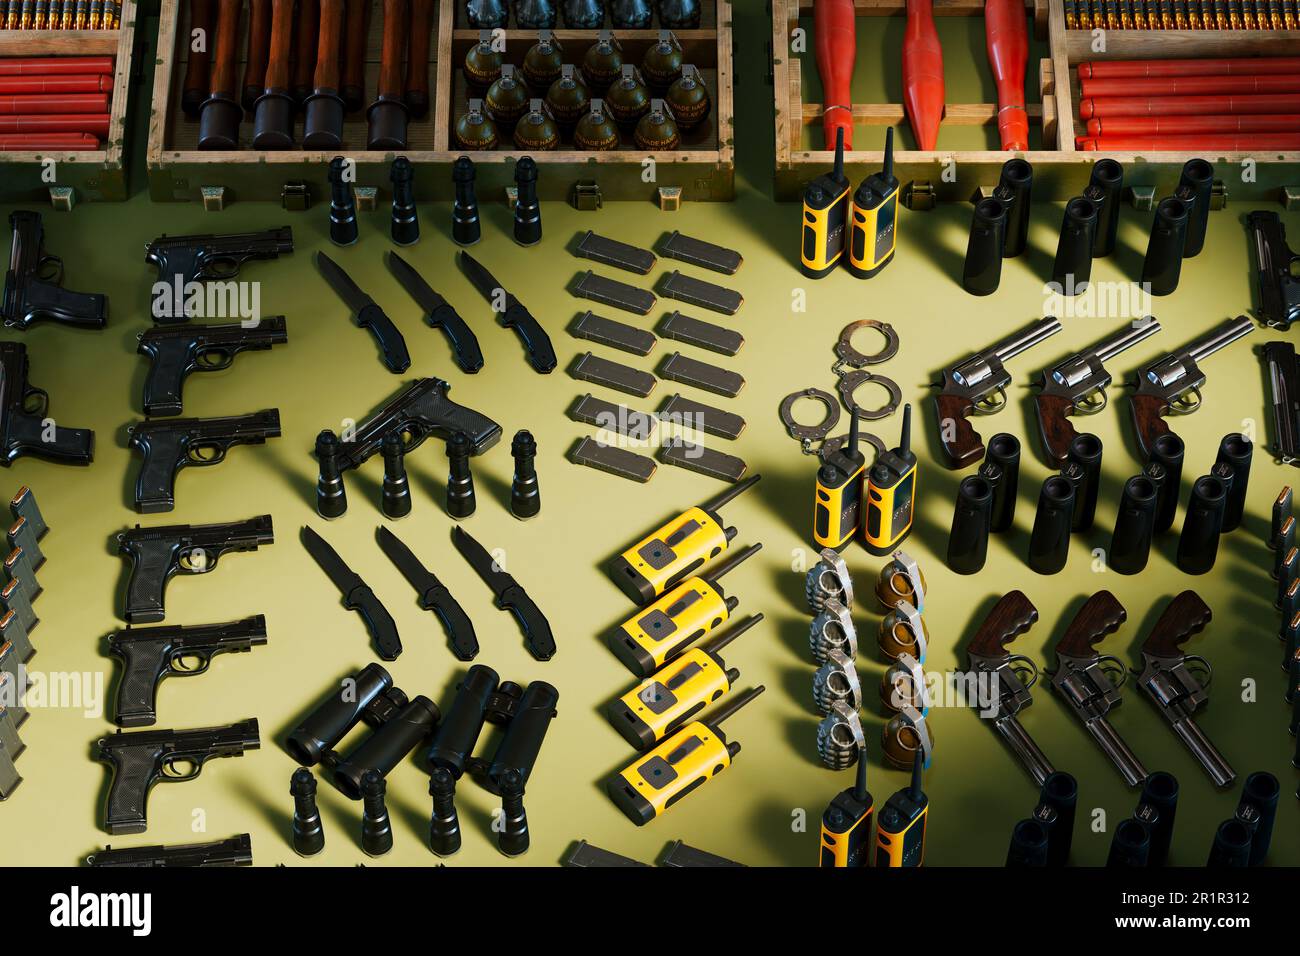 Weapons and military boxes full of ammunition. Army accessories. War equipment. Ammo, cartridges, handguns, explosive materials, binocular, grenades, Stock Photo